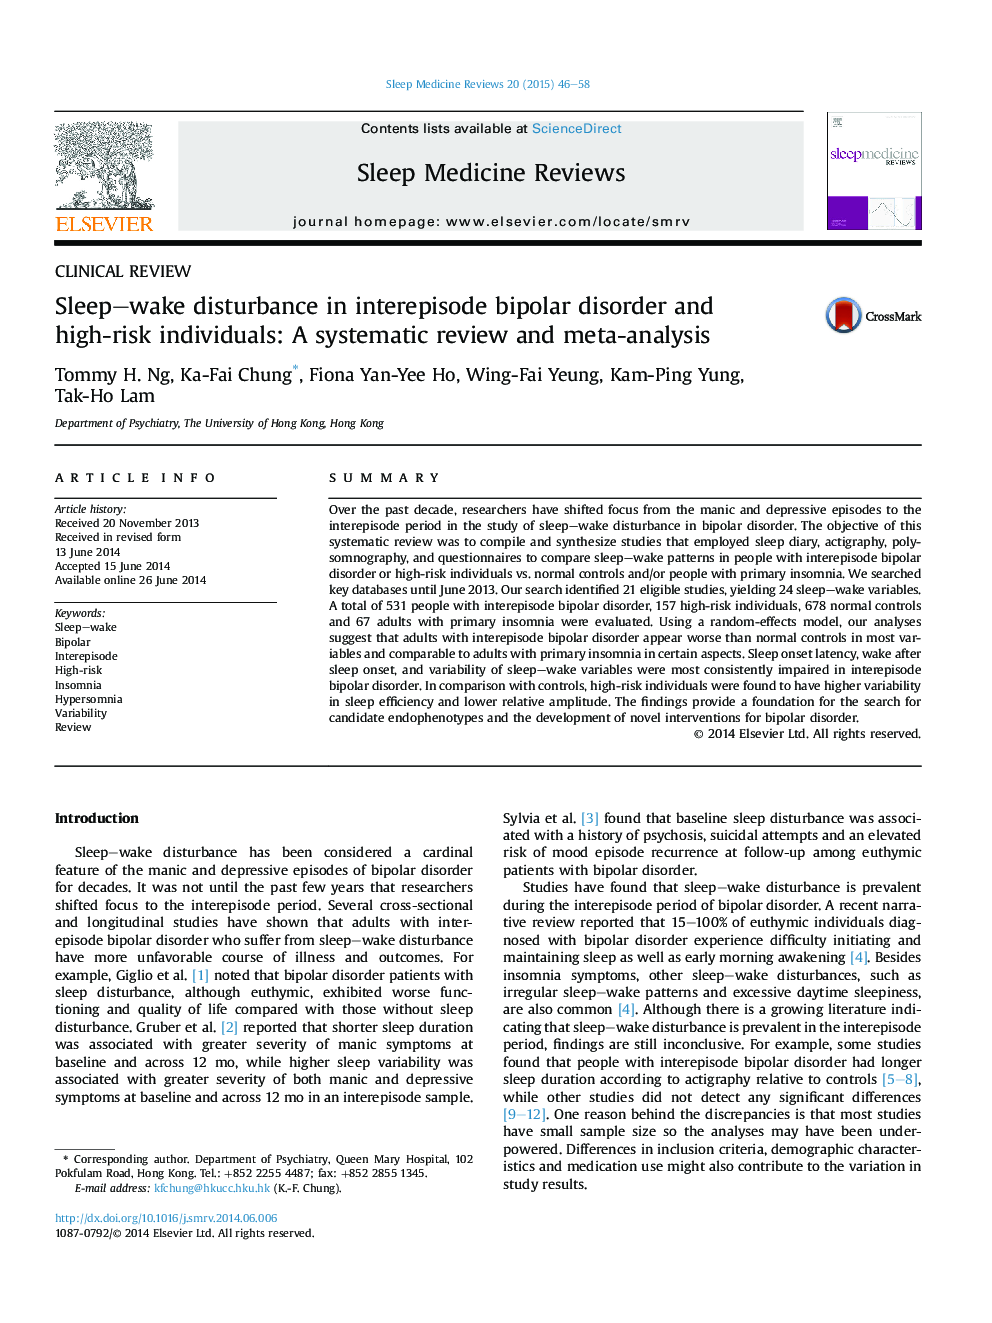 Sleep–wake disturbance in interepisode bipolar disorder and high-risk individuals: A systematic review and meta-analysis